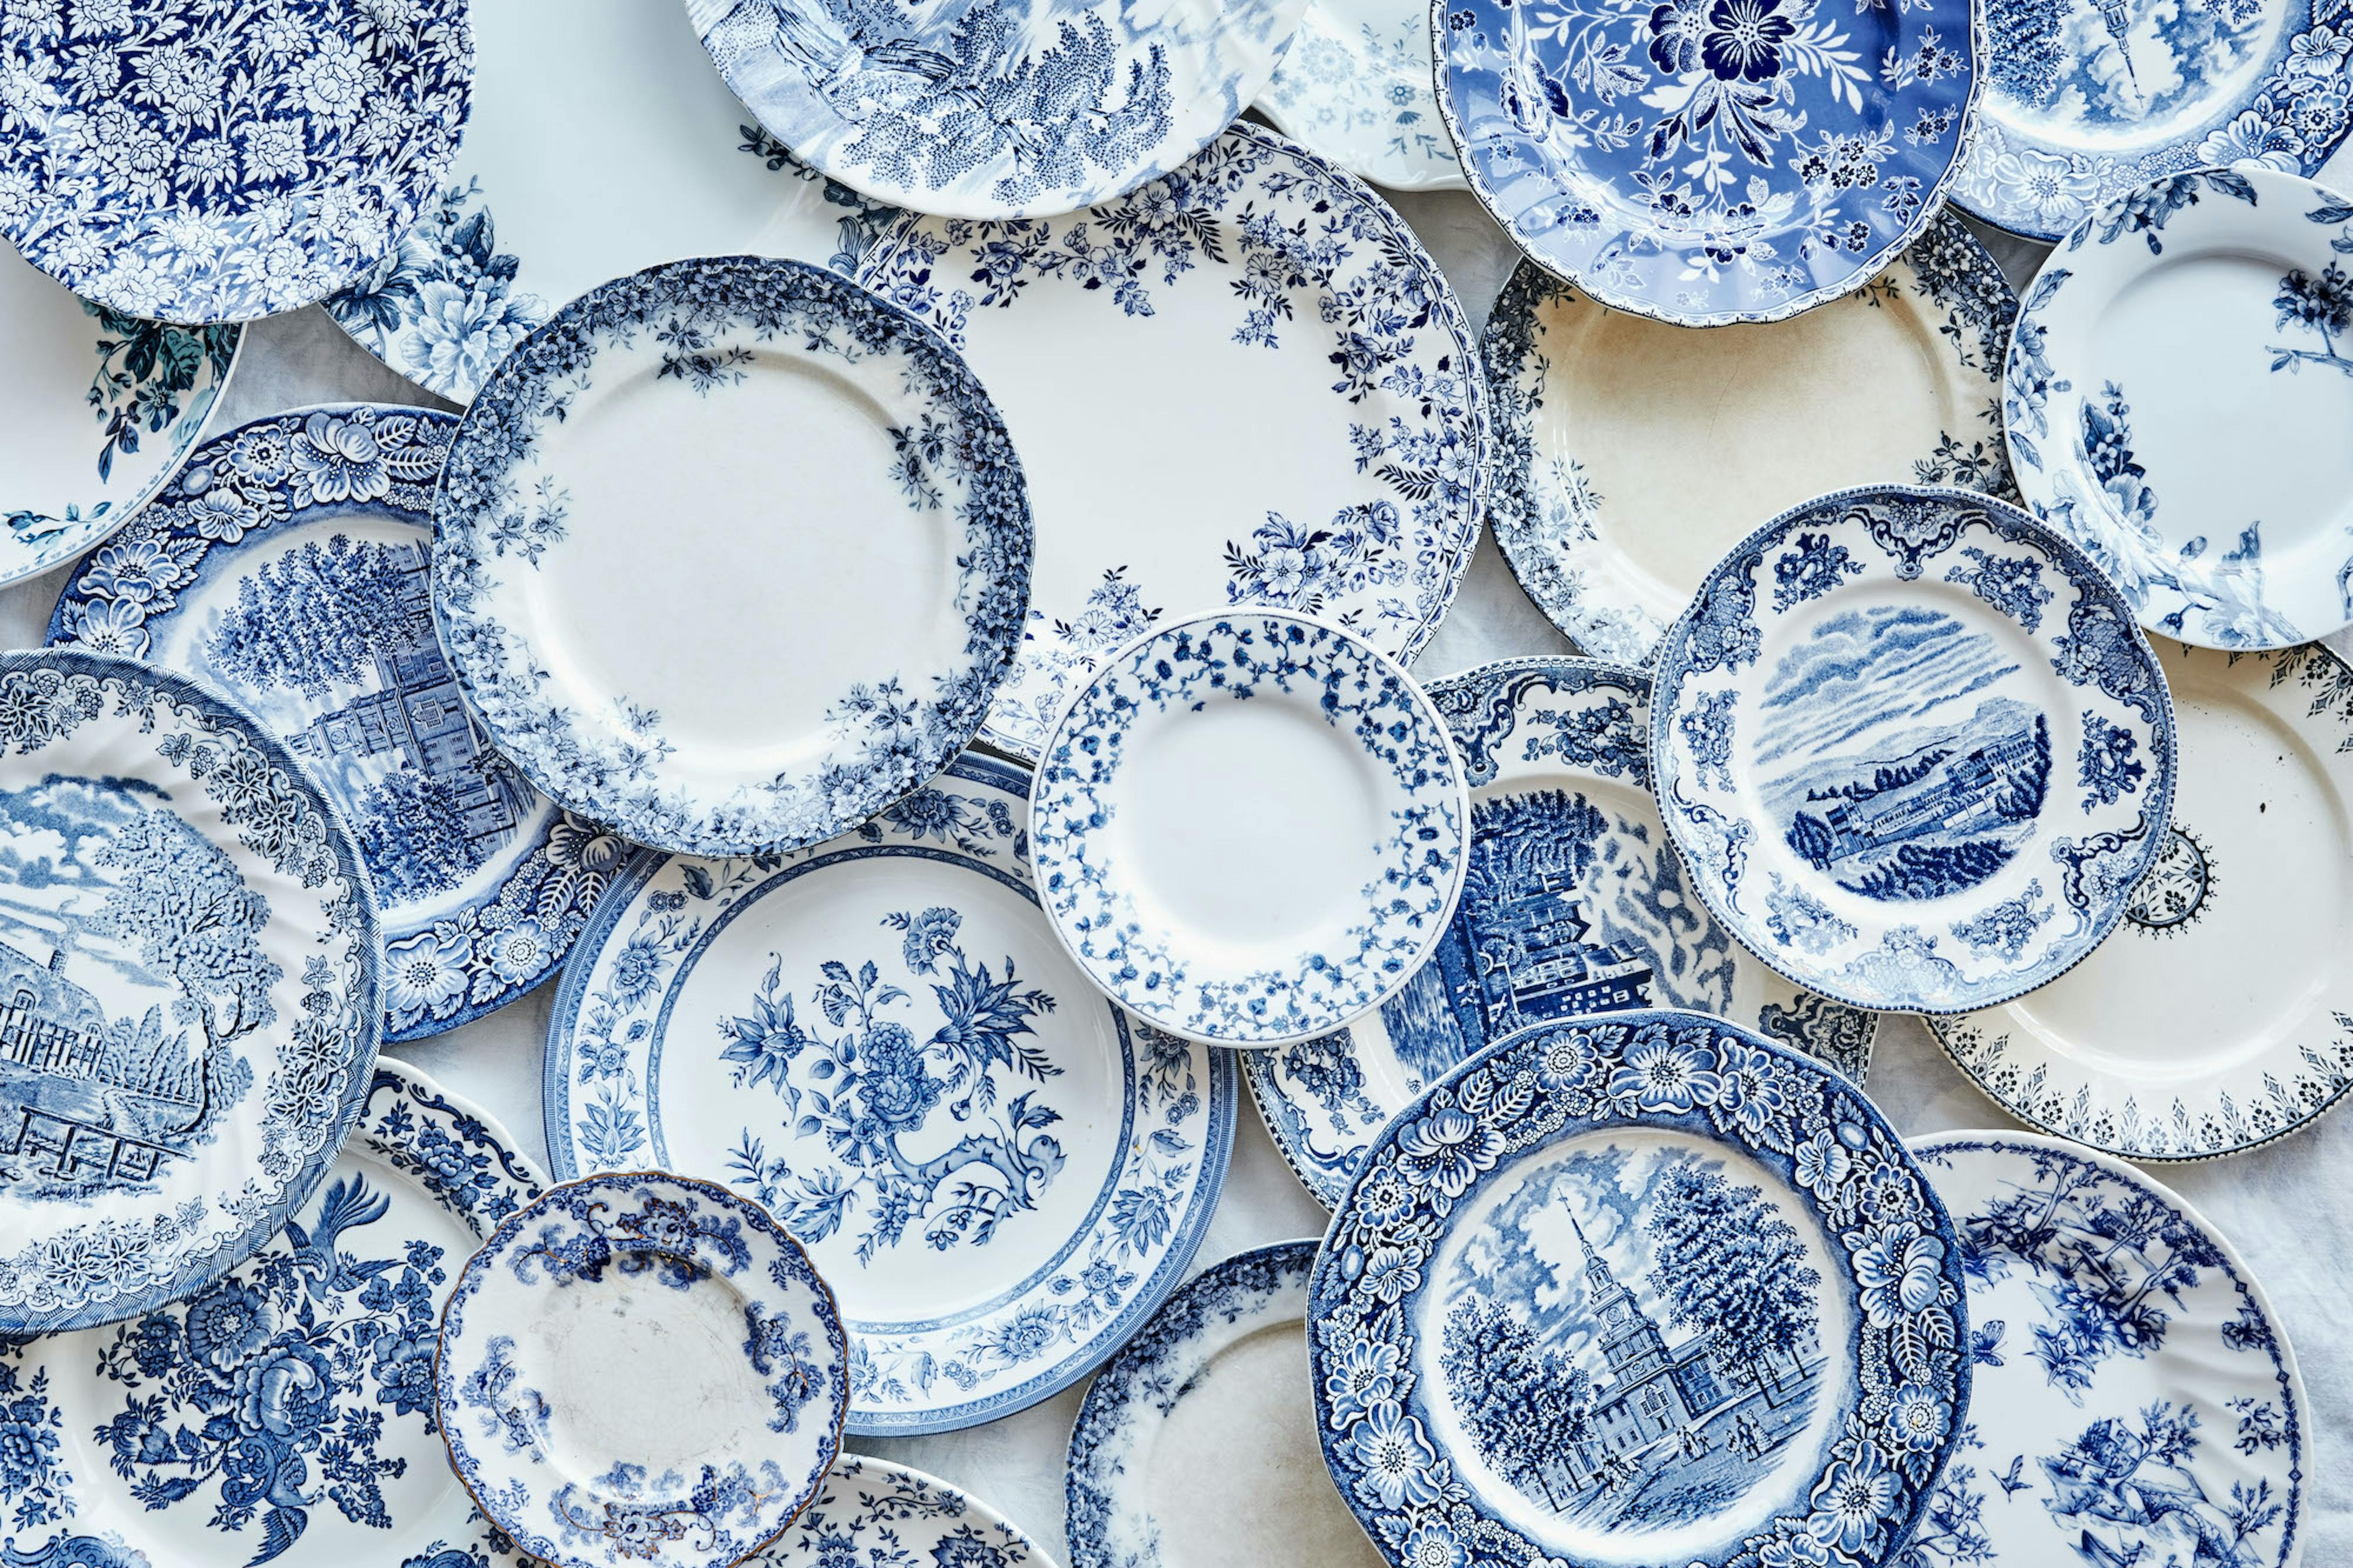 stack of blue and white plates